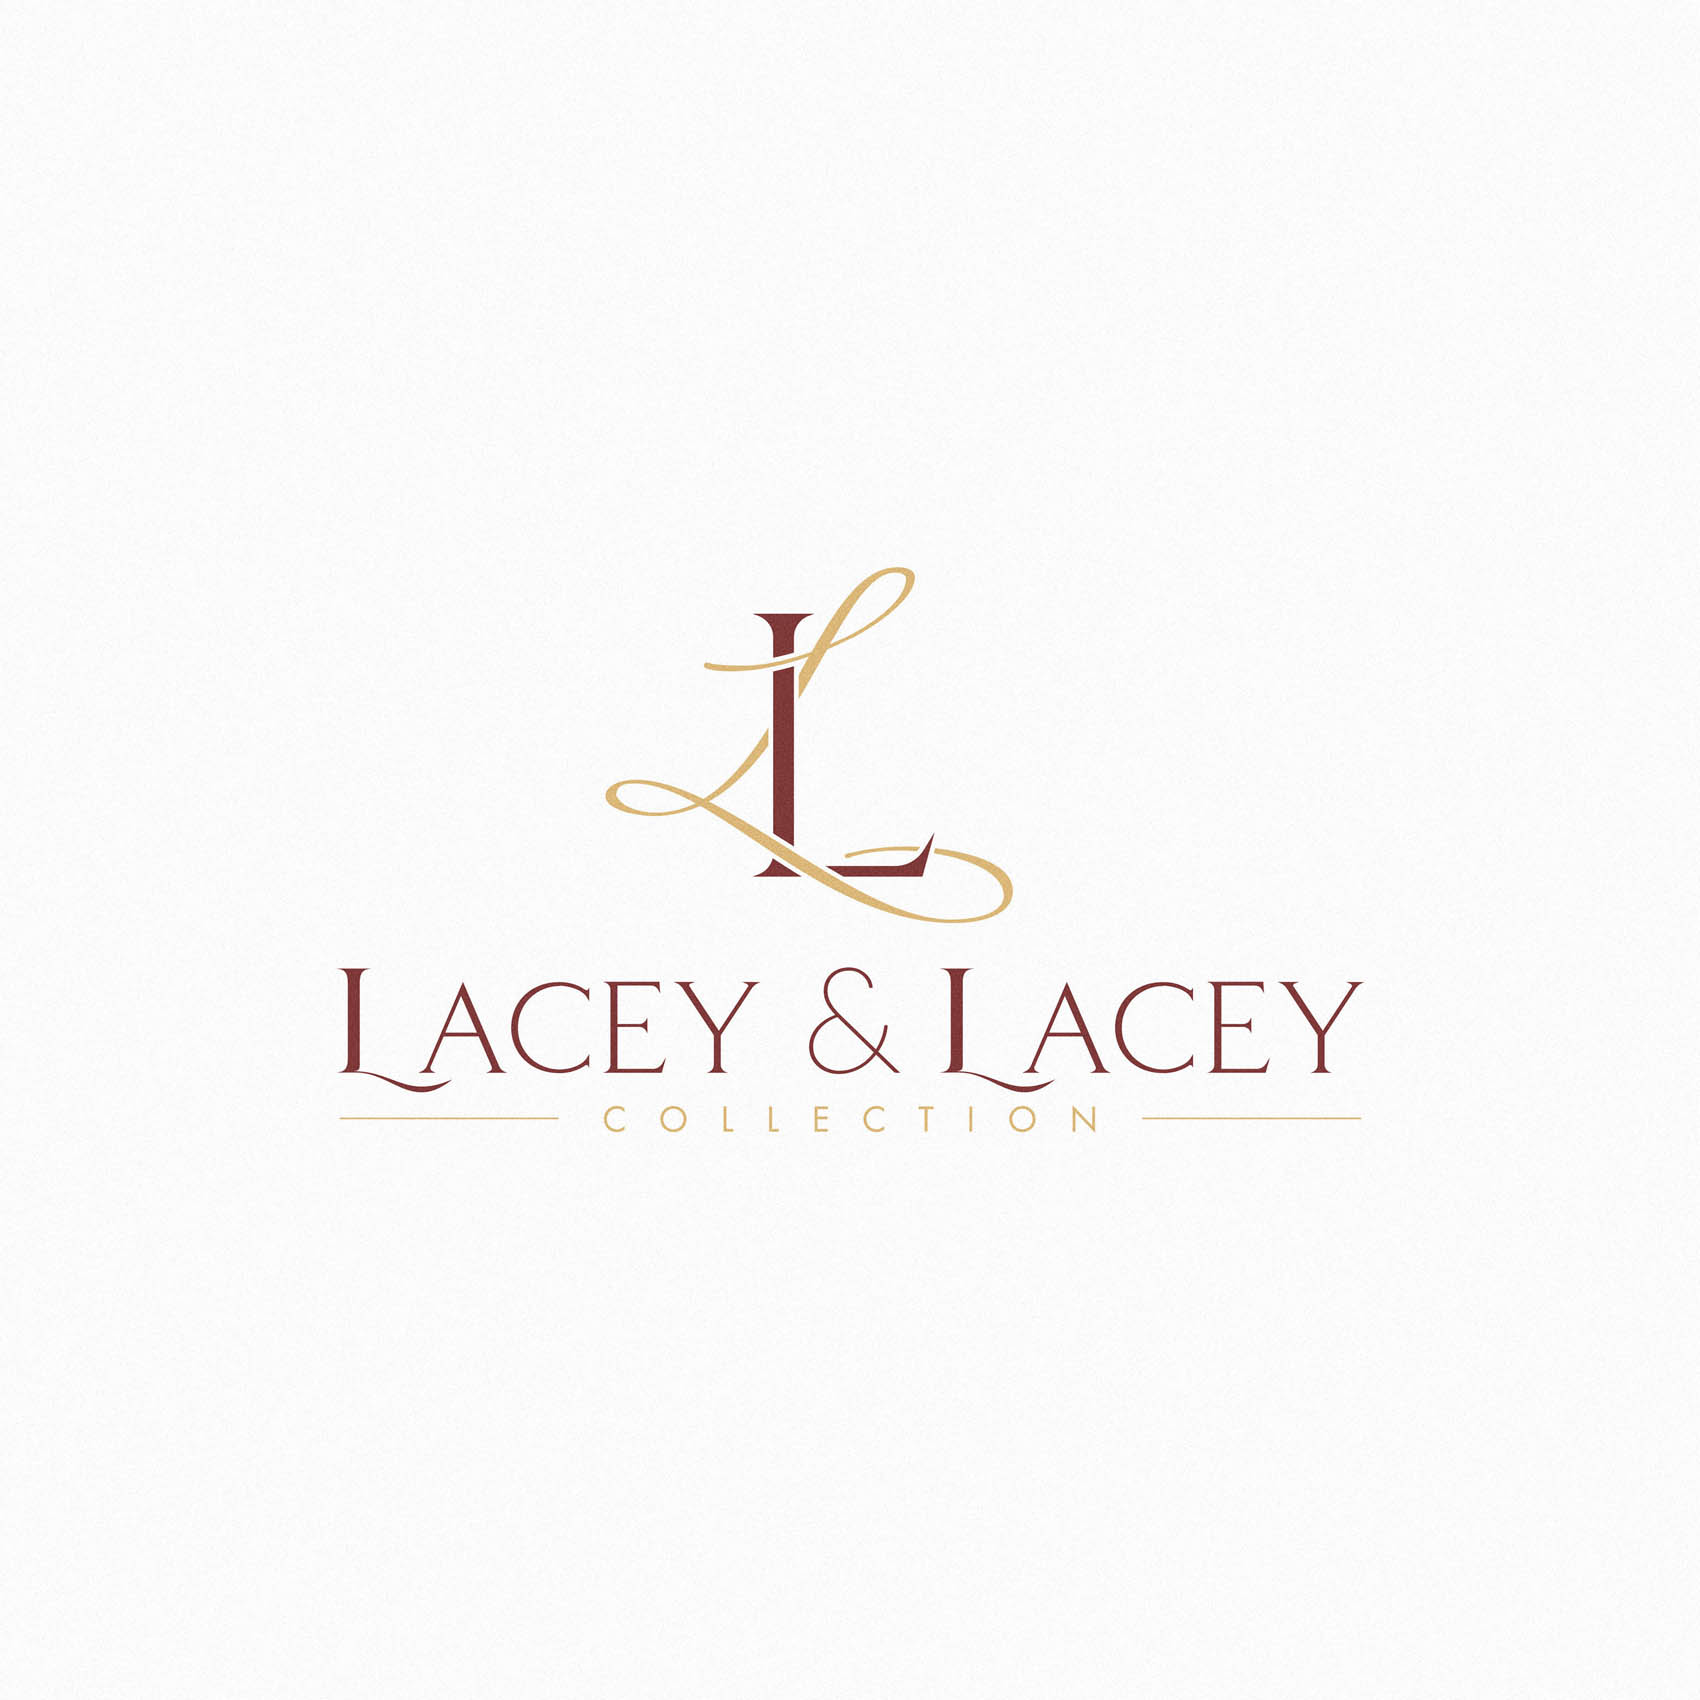 Lacey & Lacey - Luxury Candle Packaging Logo & Brand Identity13